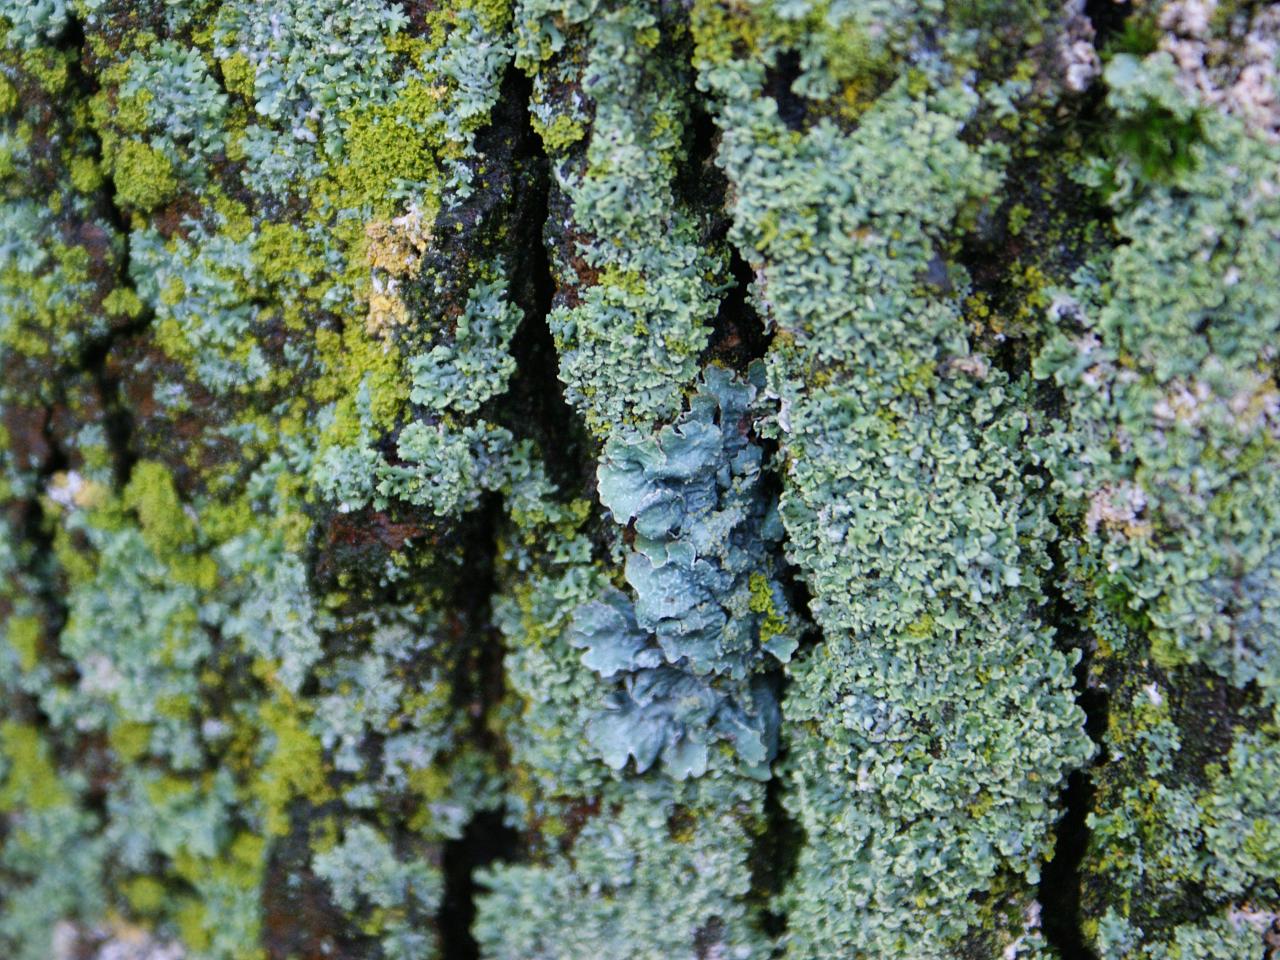 mossy vegetation growing on the side of a large tree